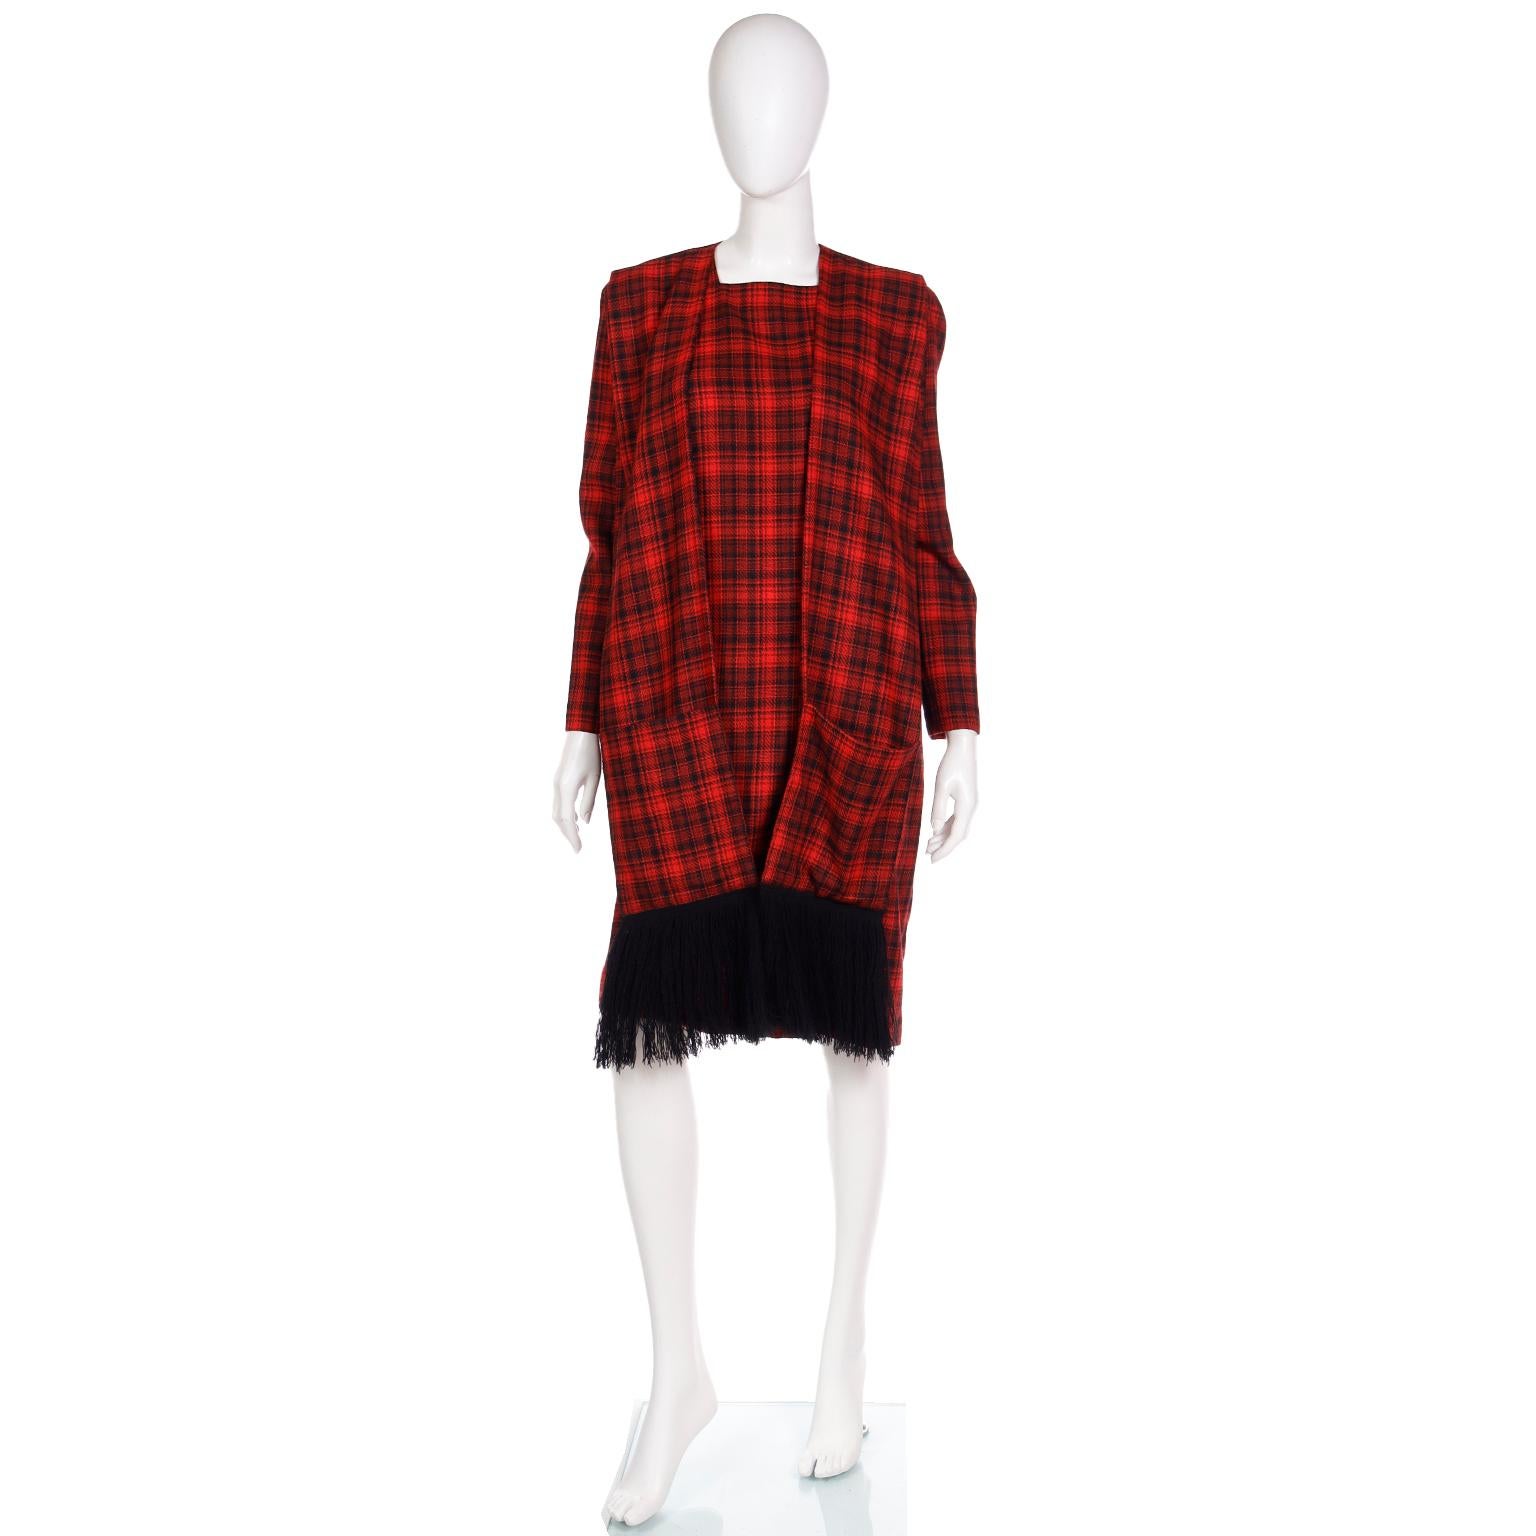 Pierre Cardin Vintage Red Plaid Dress With Long Scarf w Fringe & Pockets For Sale 2